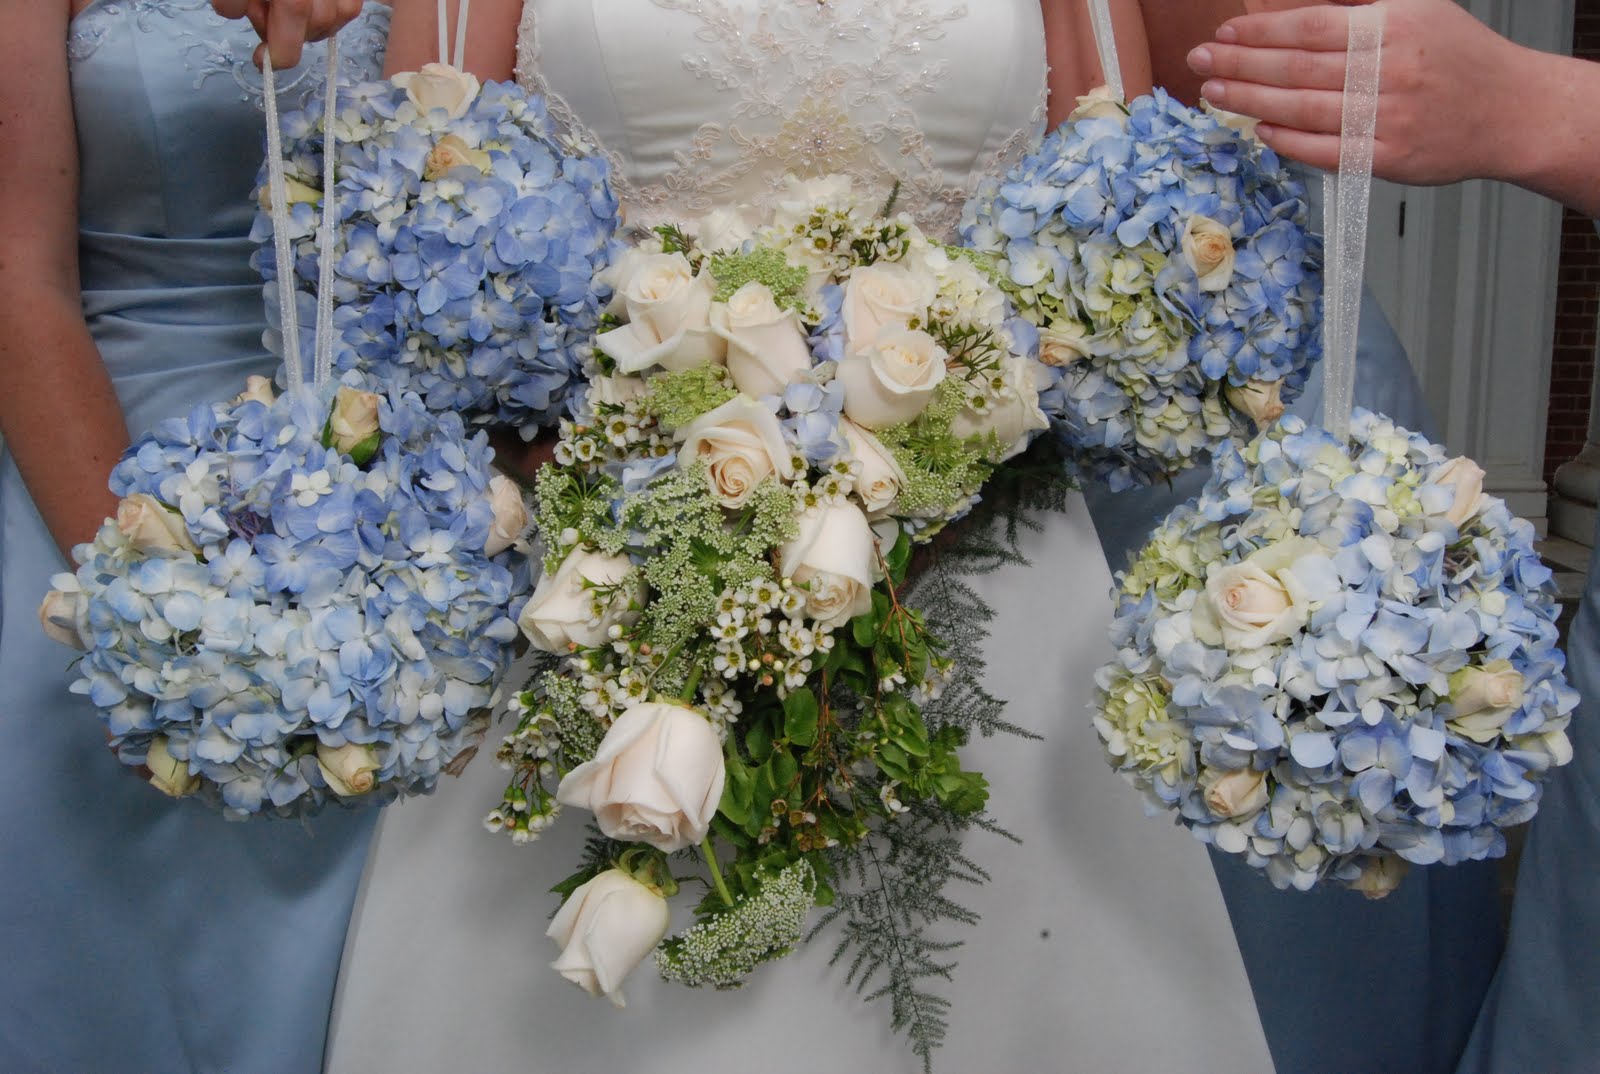 from Megan39;s wedding. The bridesmaids all carried blue hydrangea 